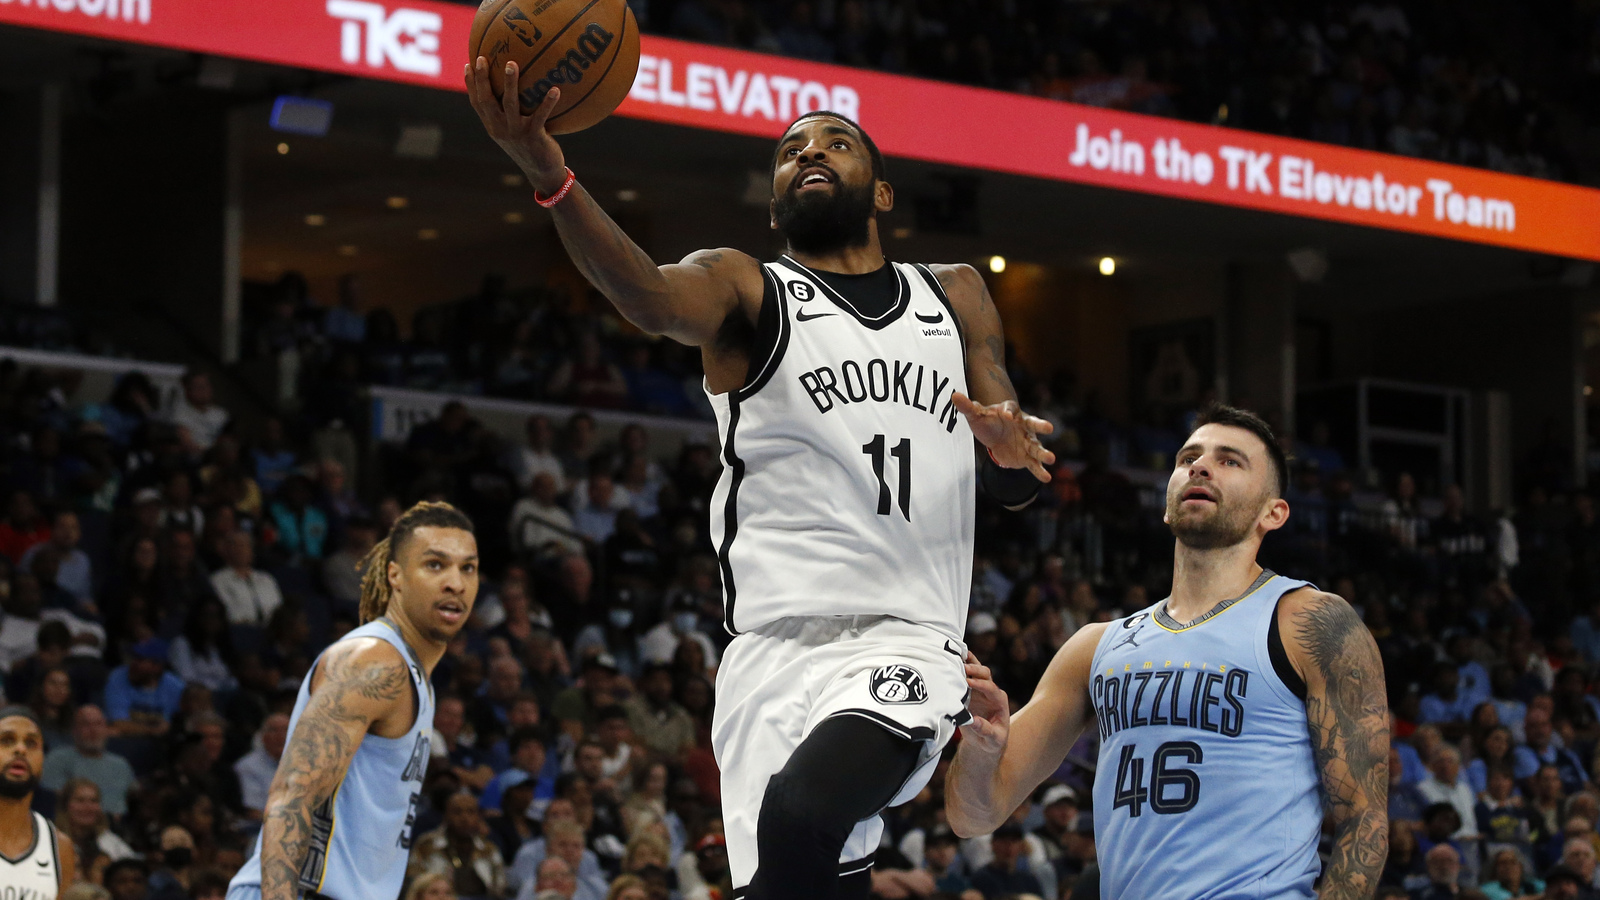 Report: ‘No momentum’ for Nets’ Kyrie Irving to return before Nov. 20